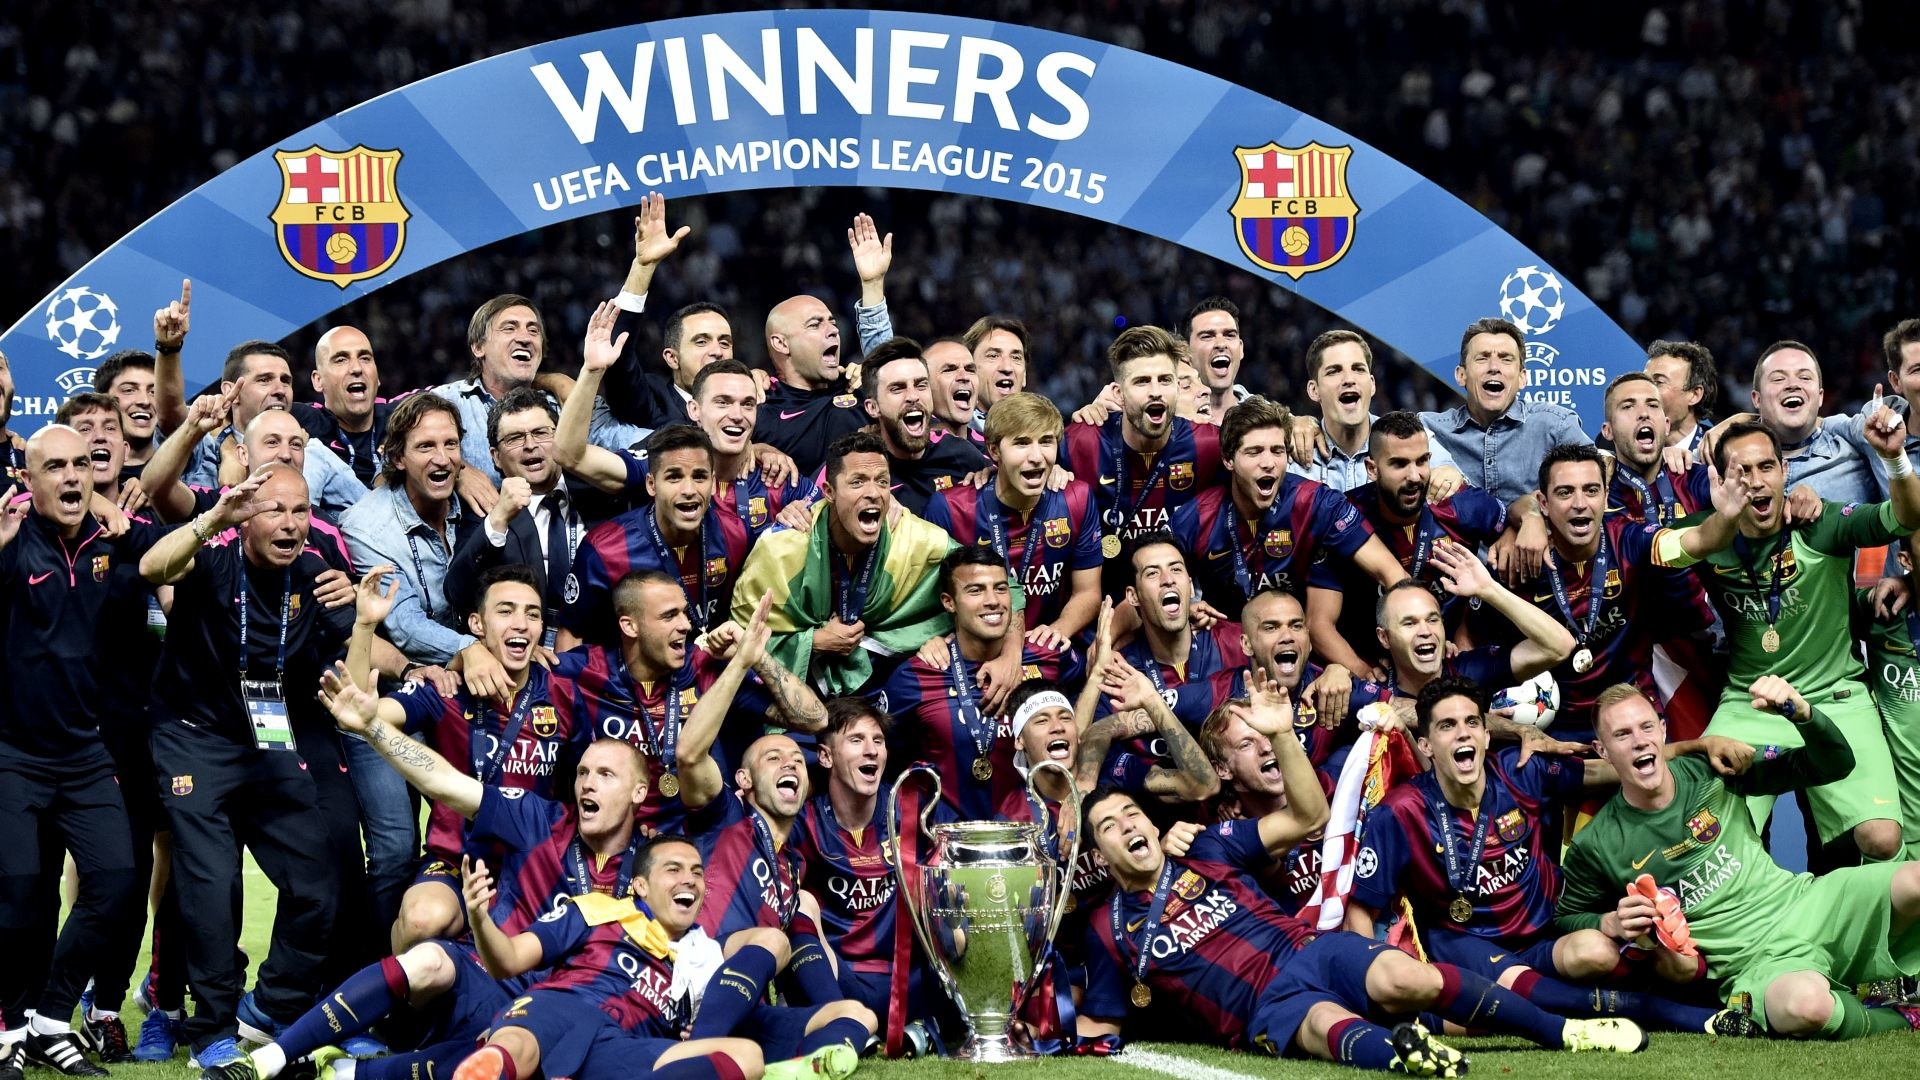 1920x1080 Champions League | Wallpaper groups | JeffWallPapers | Page 2 ...